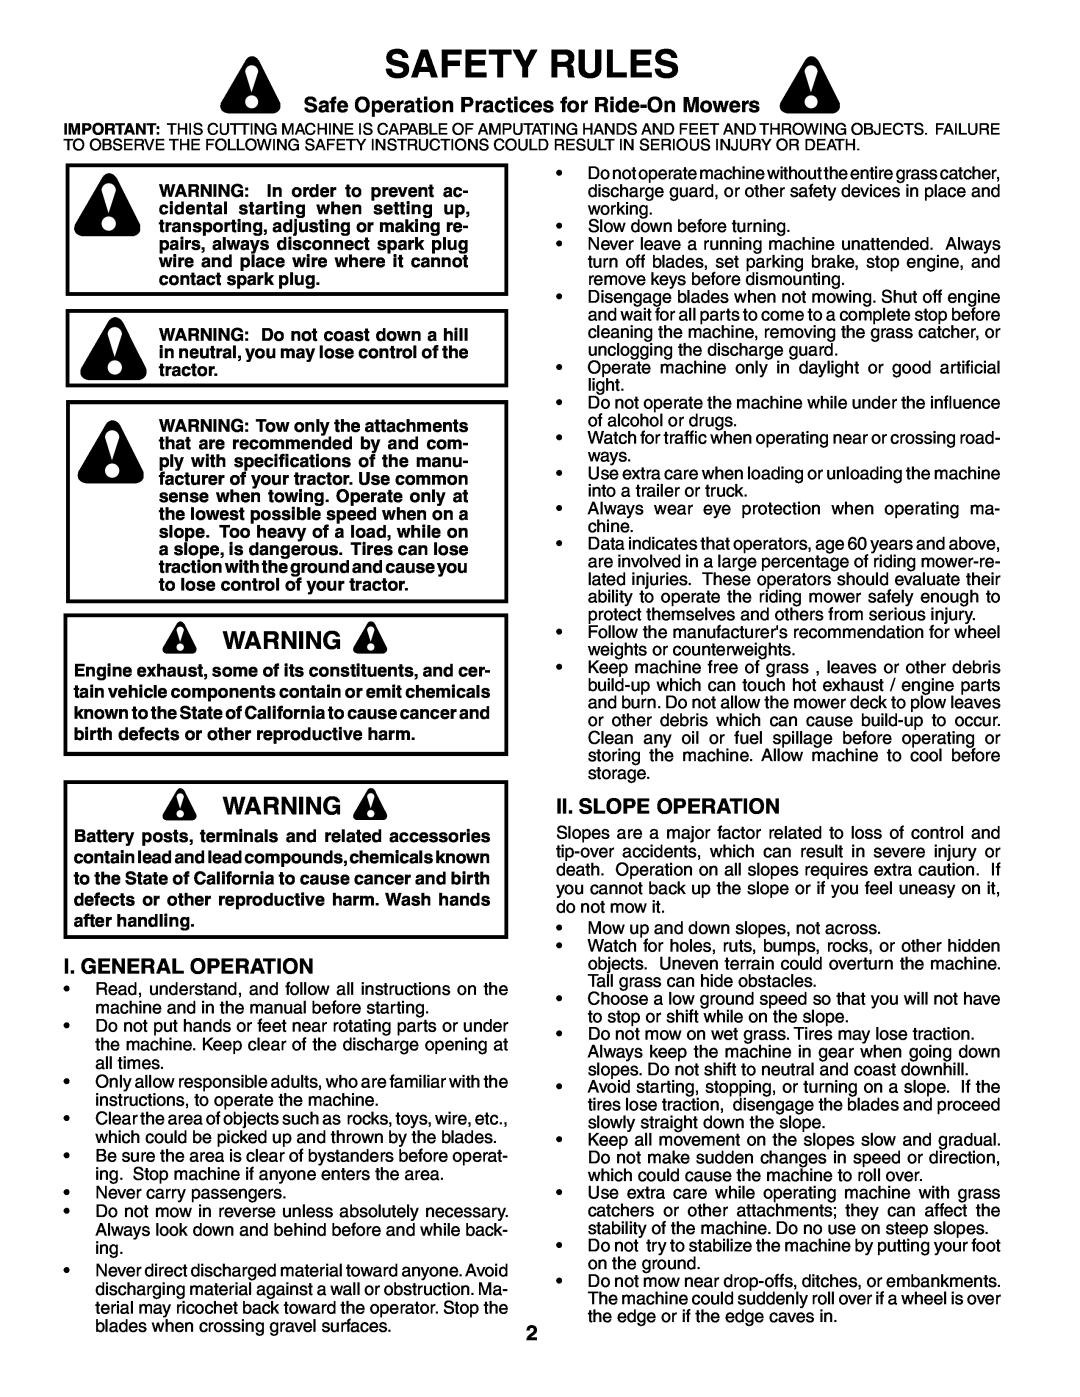 Poulan PK19H42YT Safety Rules, Safe Operation Practices for Ride-On Mowers, I. General Operation, Ii. Slope Operation 